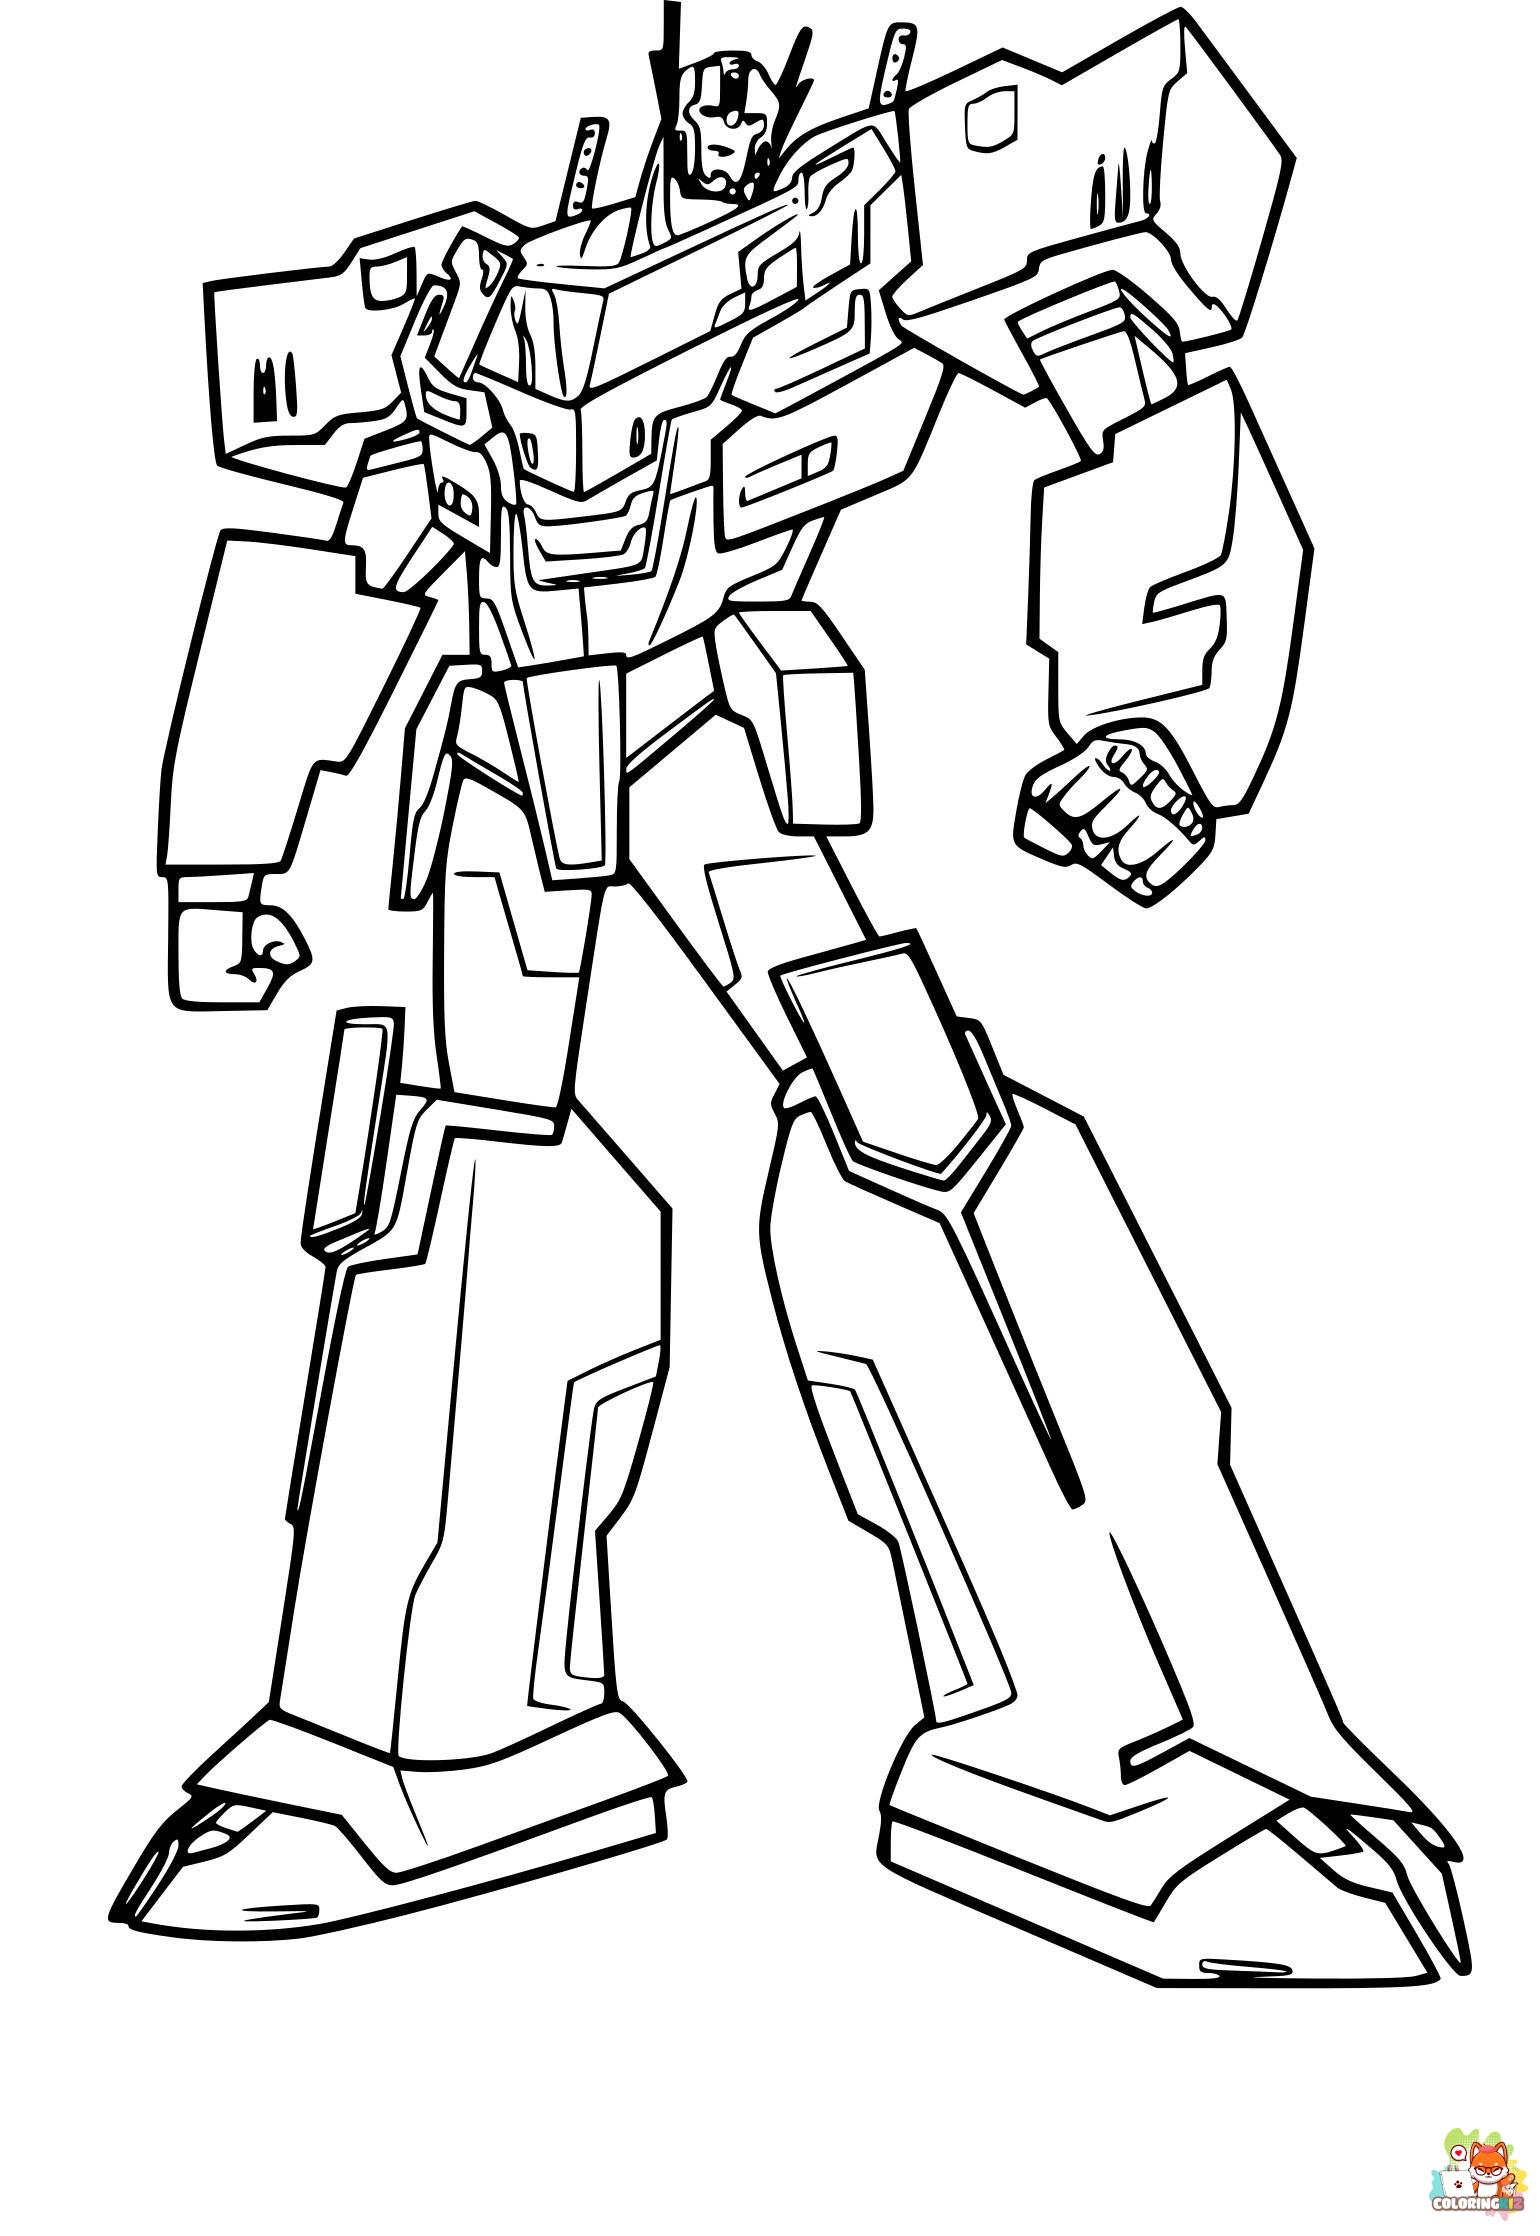 Optimus Prime coloring pages free 2